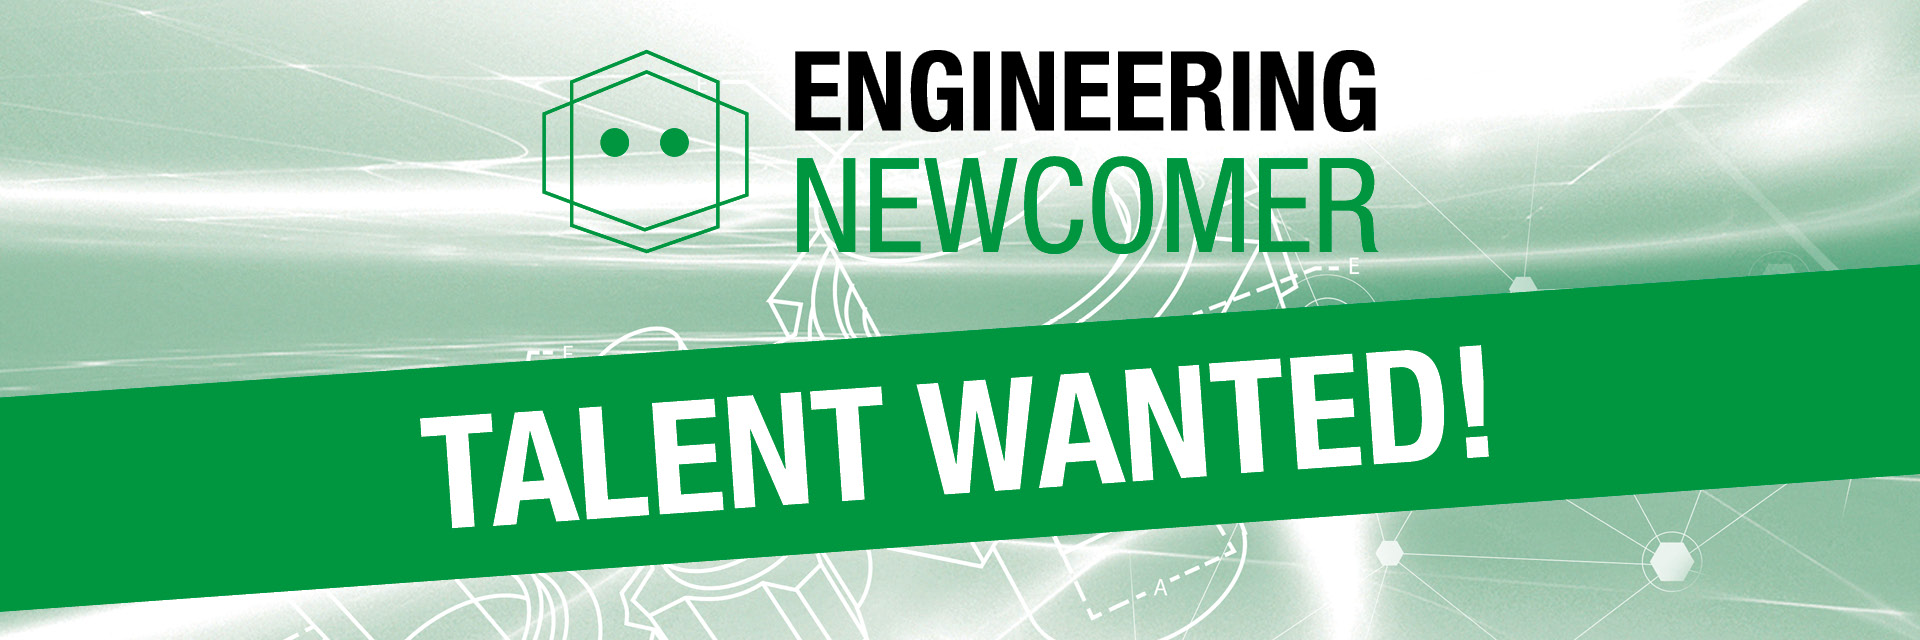 Engineering Newcomer Talent Wanted